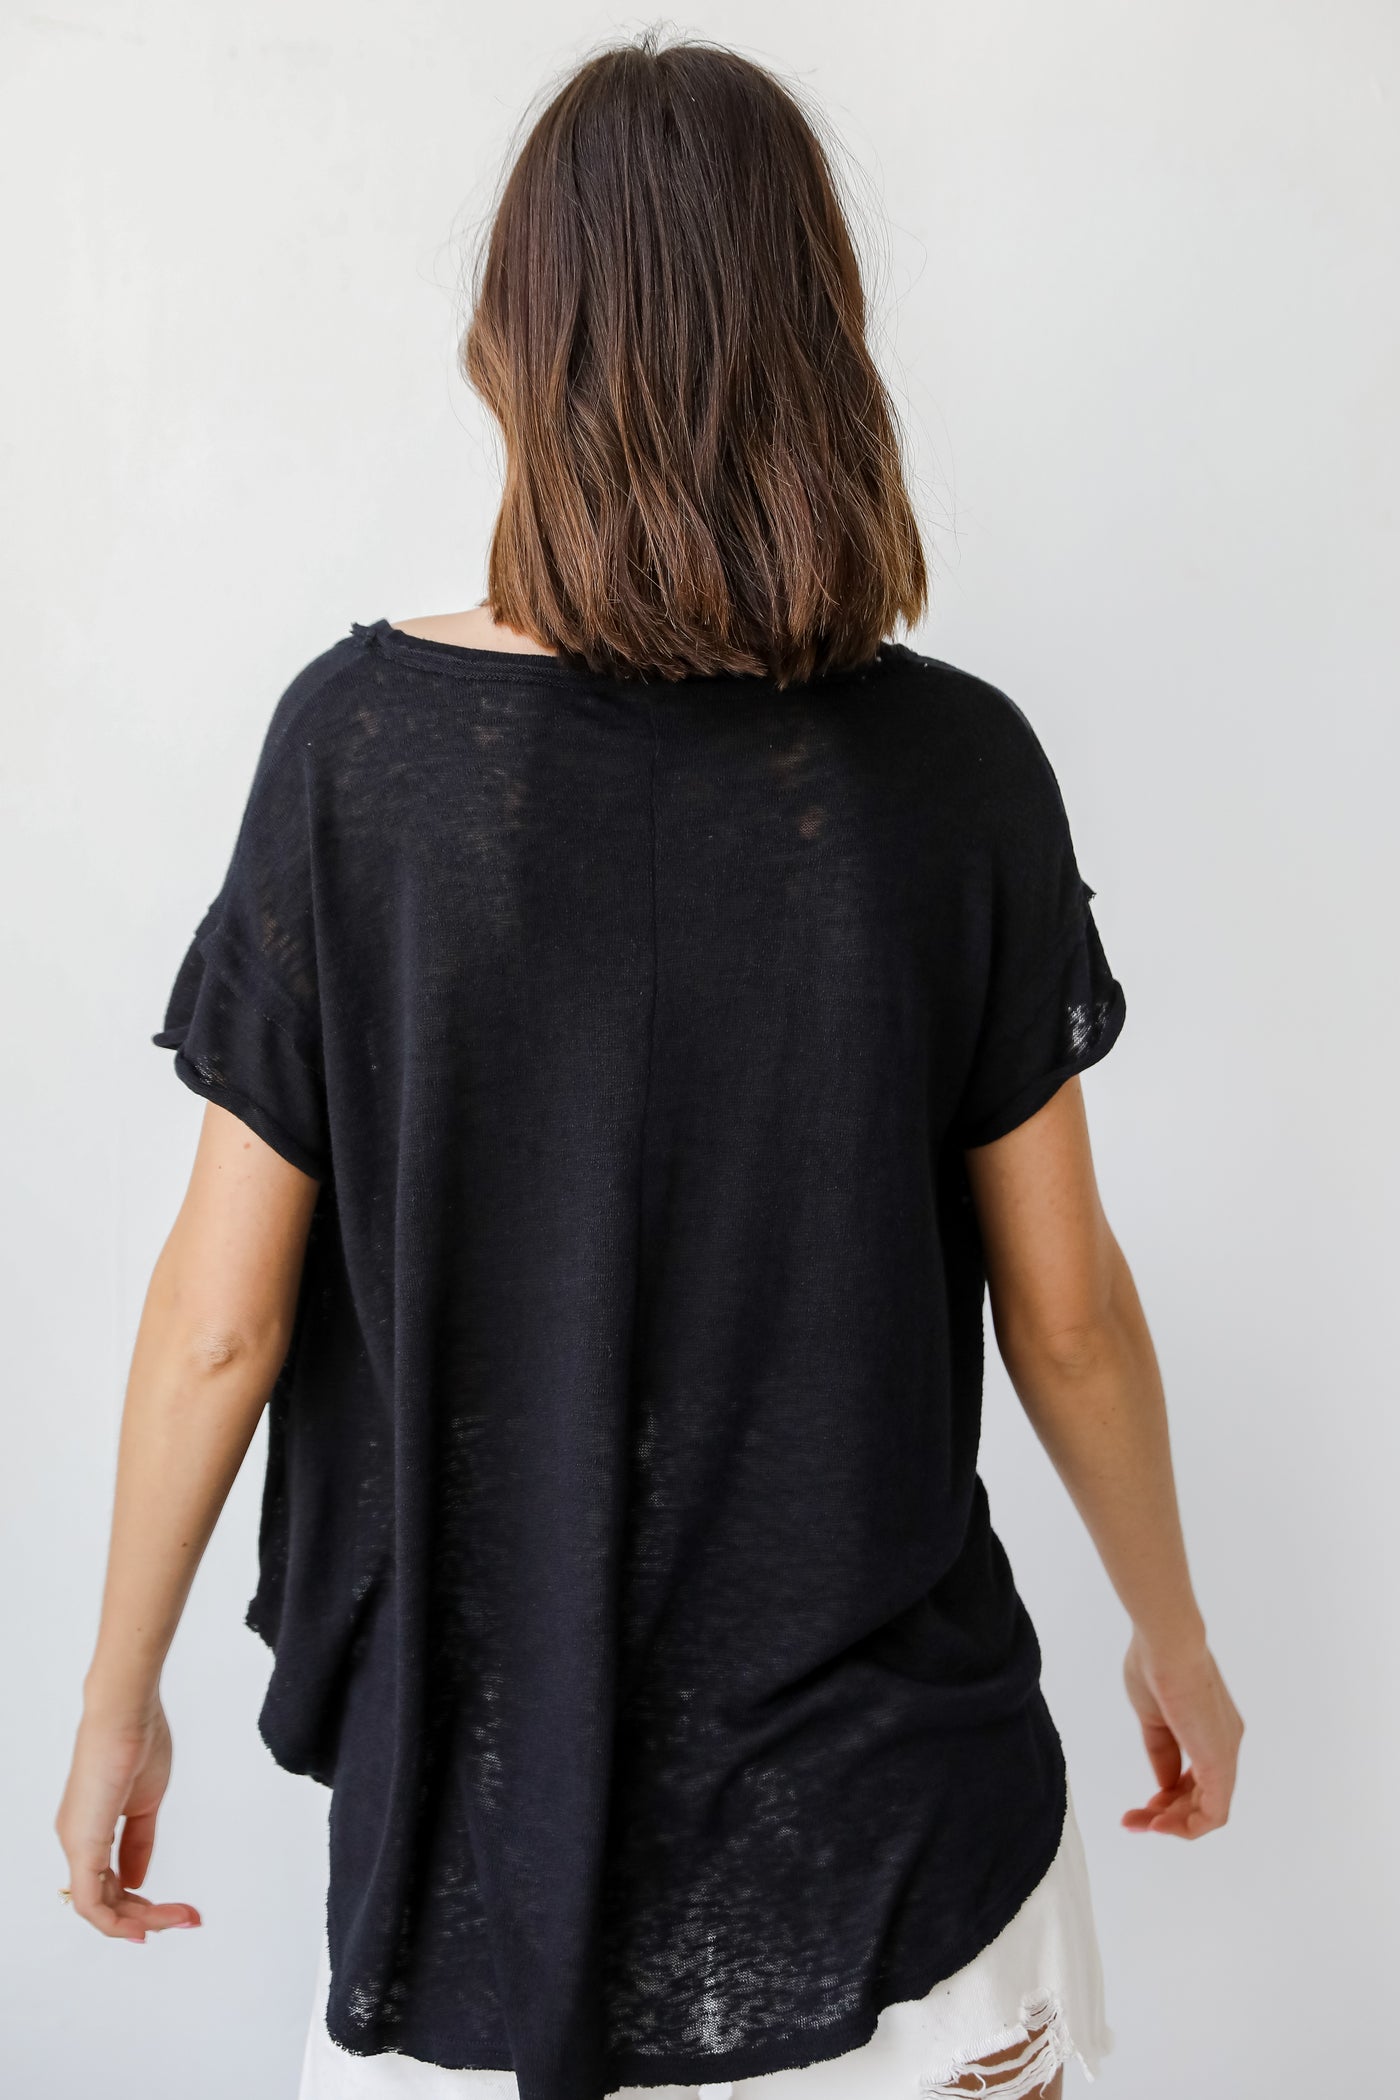 Knit Exposed Seam Tee in black back view